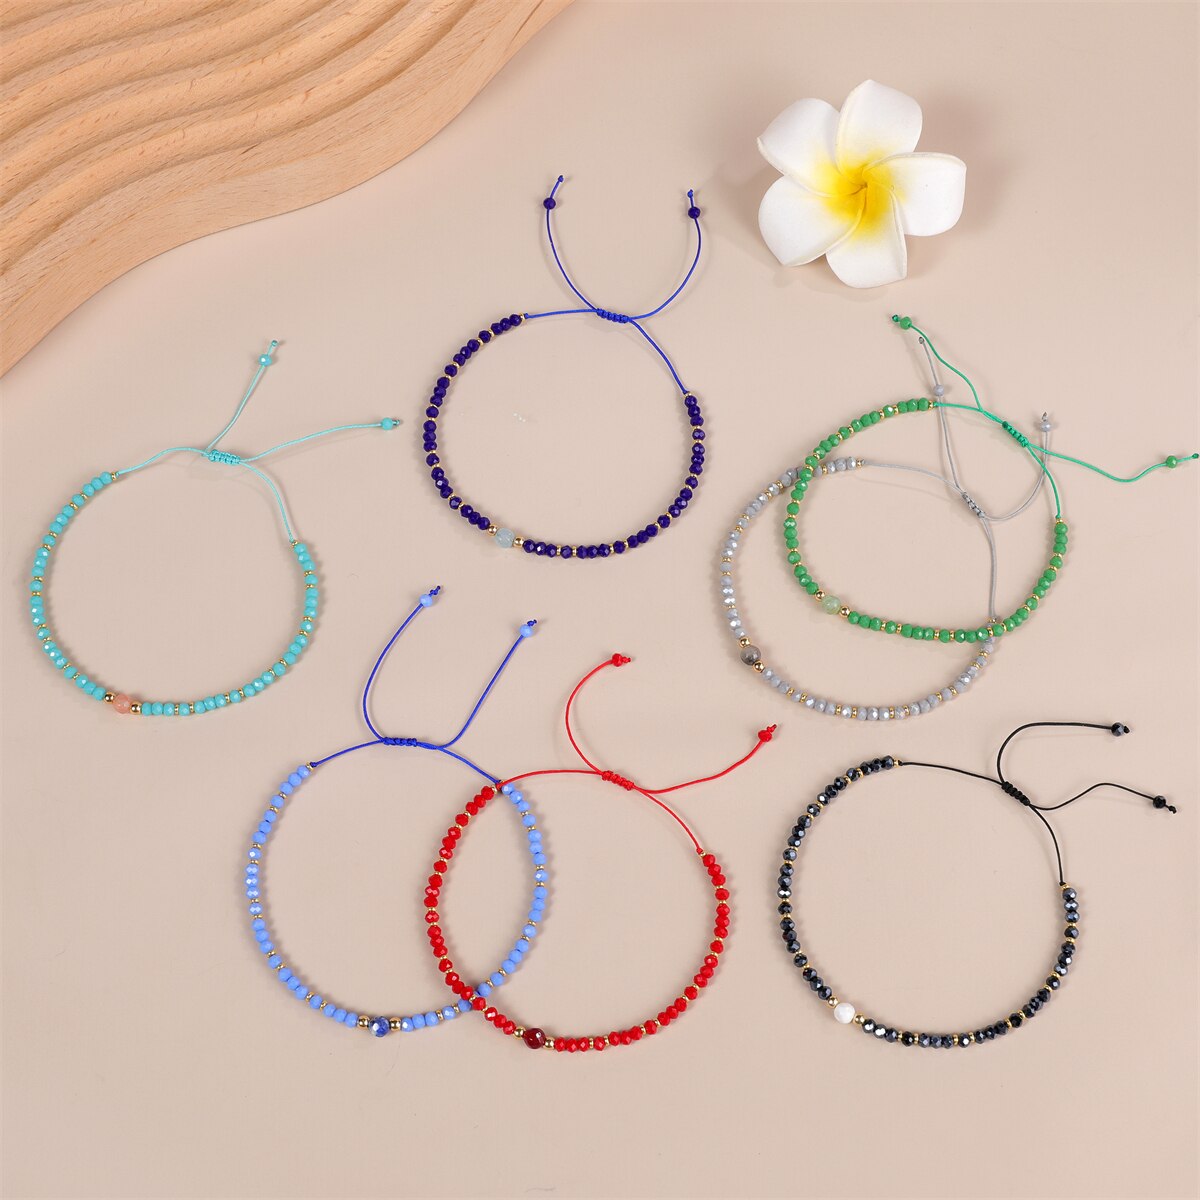 Women Crystal Faceted Glass Beads Charms Bracelets Boho Woven Adjustable Wristband Cuff Jewelry